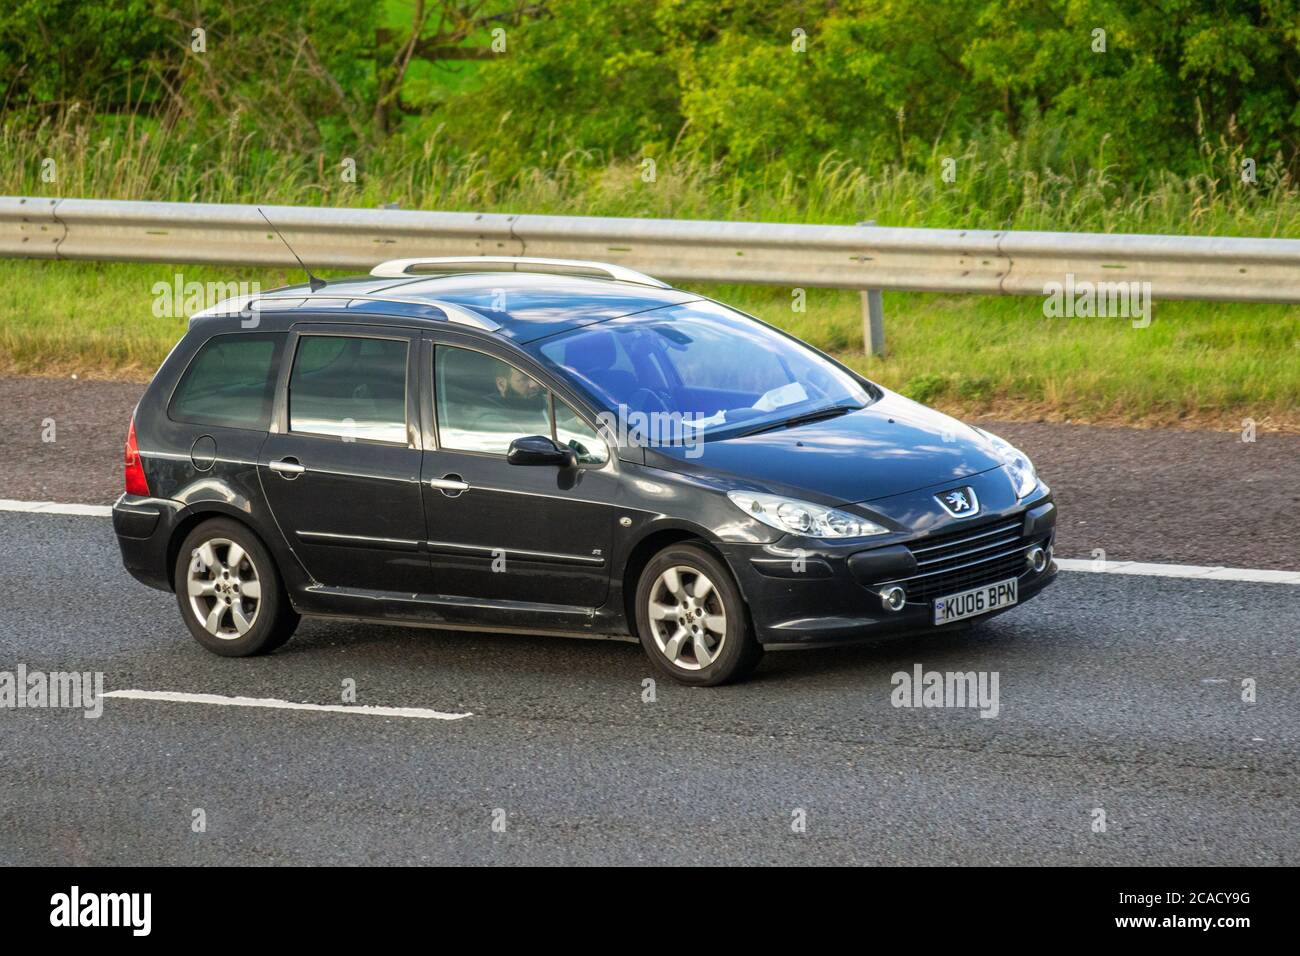 https://c8.alamy.com/comp/2CACY9G/2006-black-peugeot-307-sw-se-hdi-vehicular-traffic-moving-vehicles-cars-driving-vehicle-on-uk-roads-motors-motoring-on-the-m6-motorway-highway-network-2CACY9G.jpg